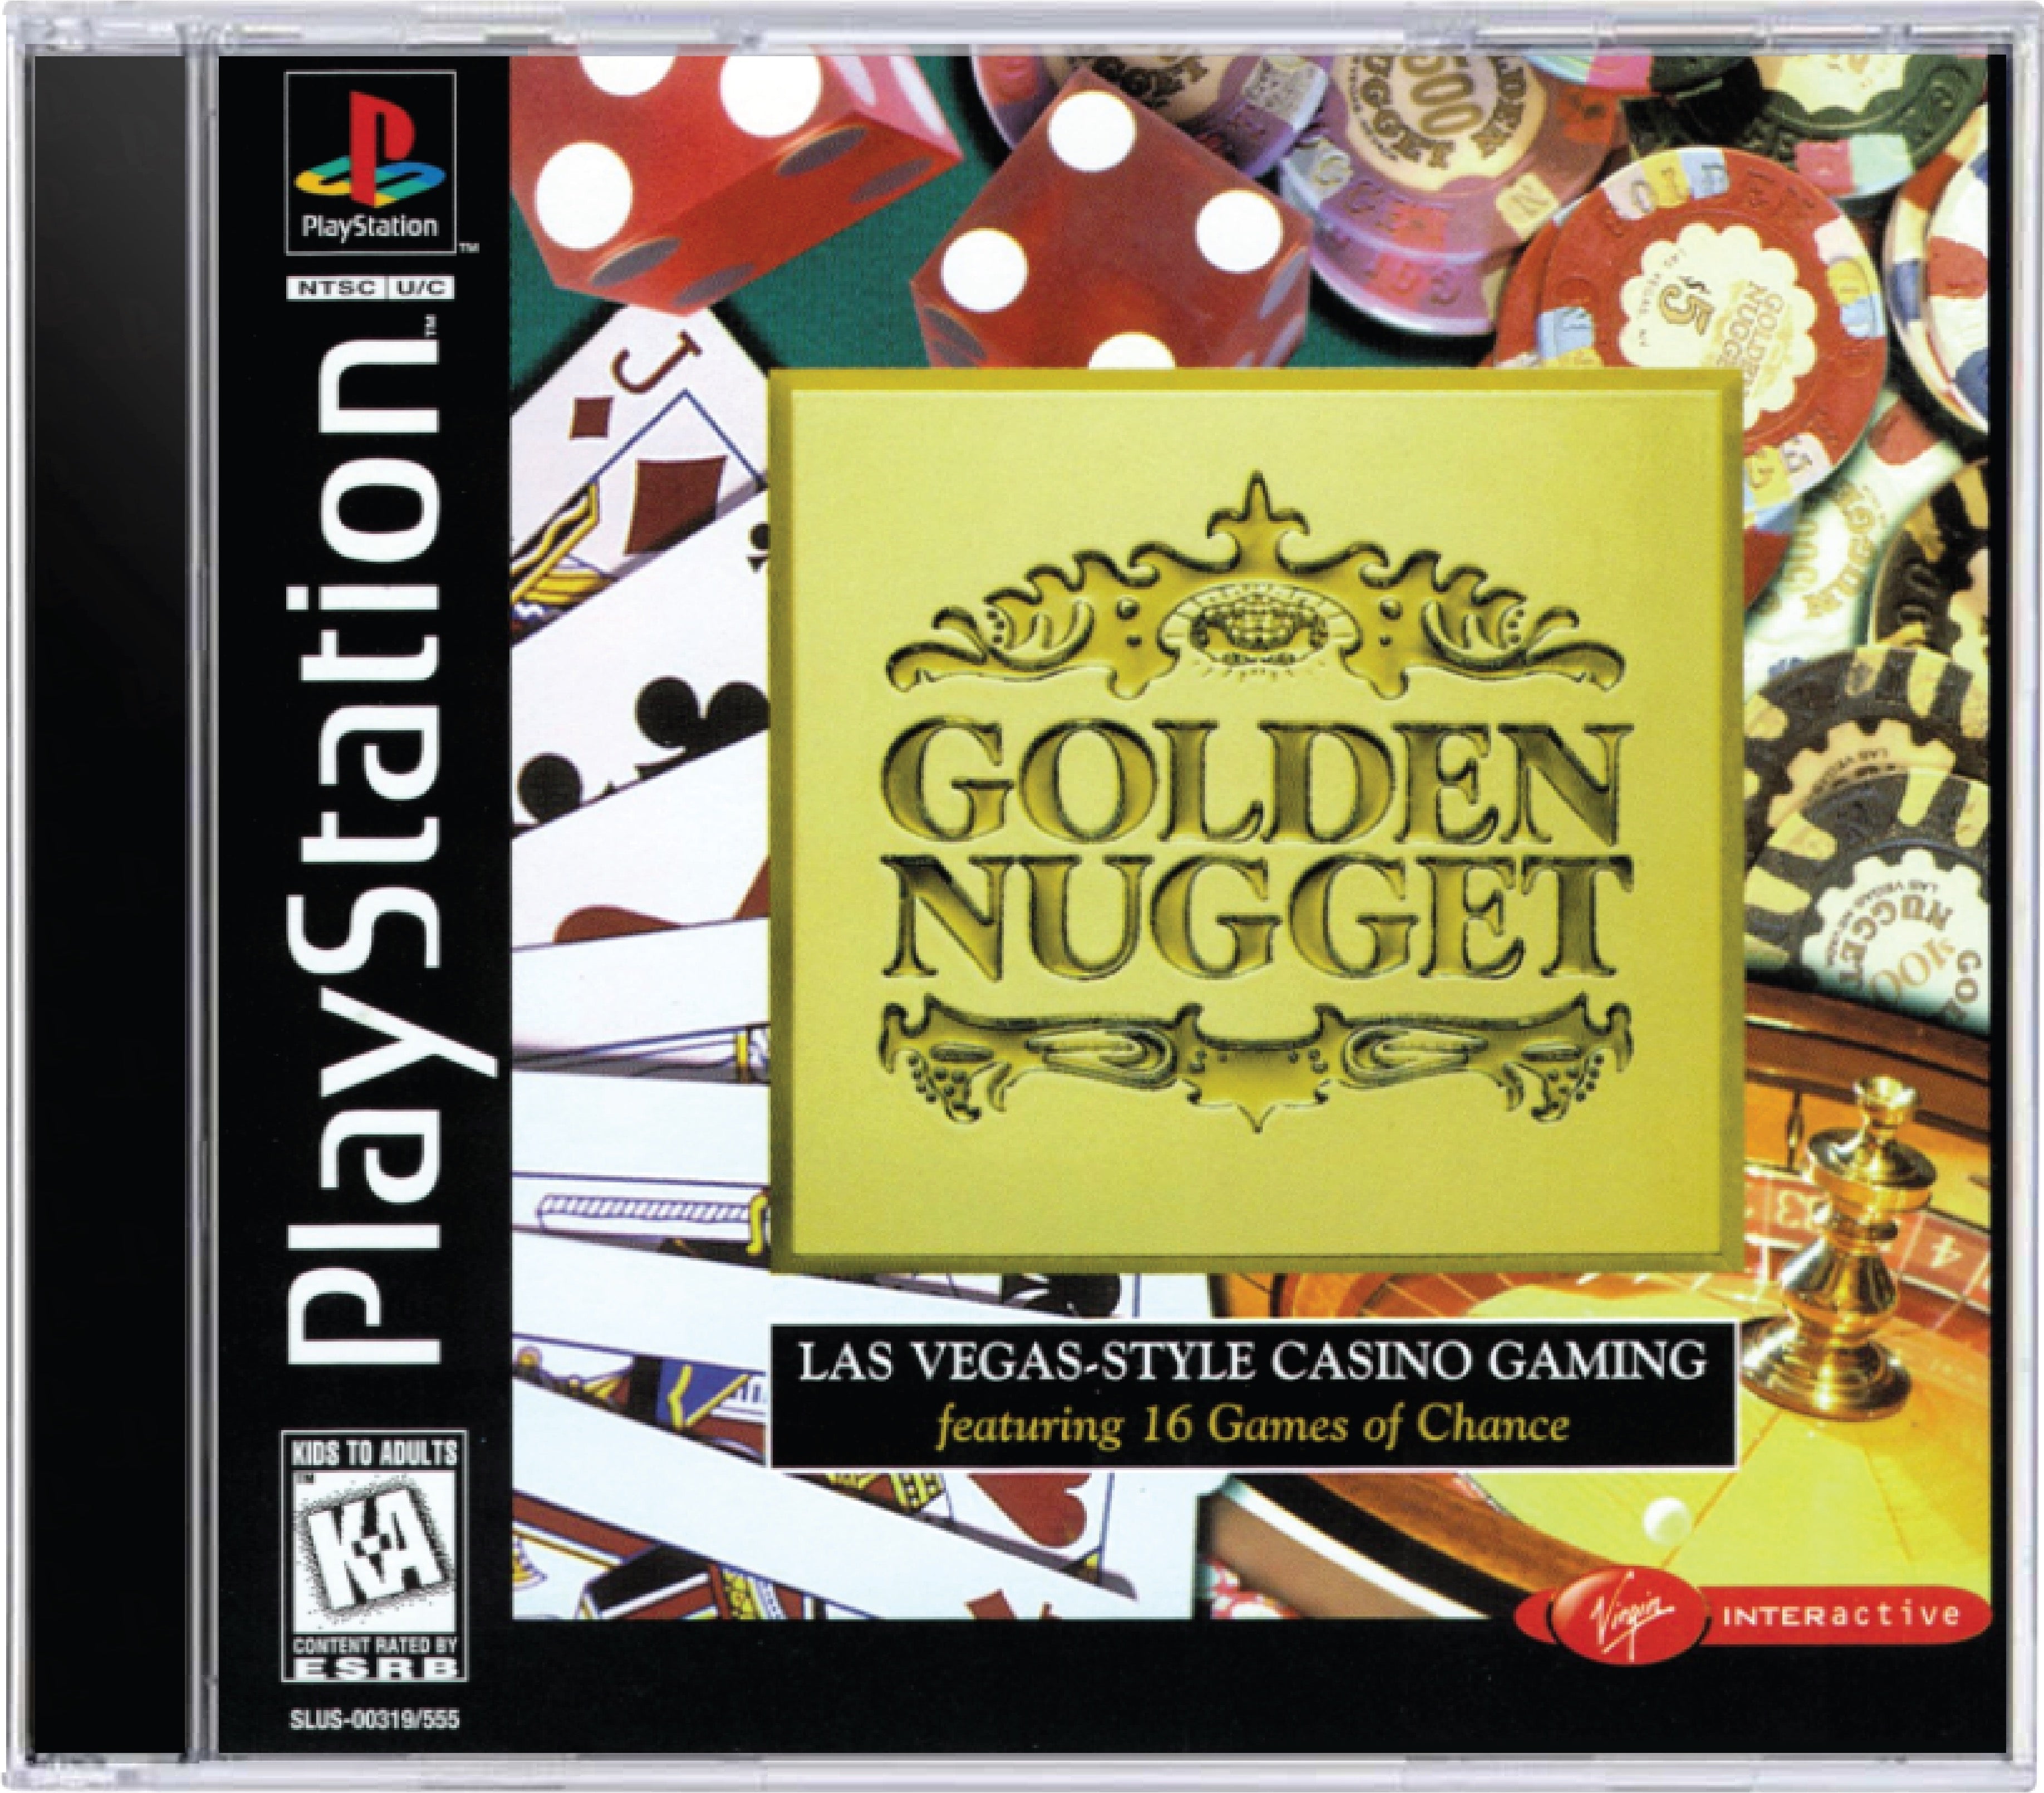 Golden Nugget Cover Art and Product Photo